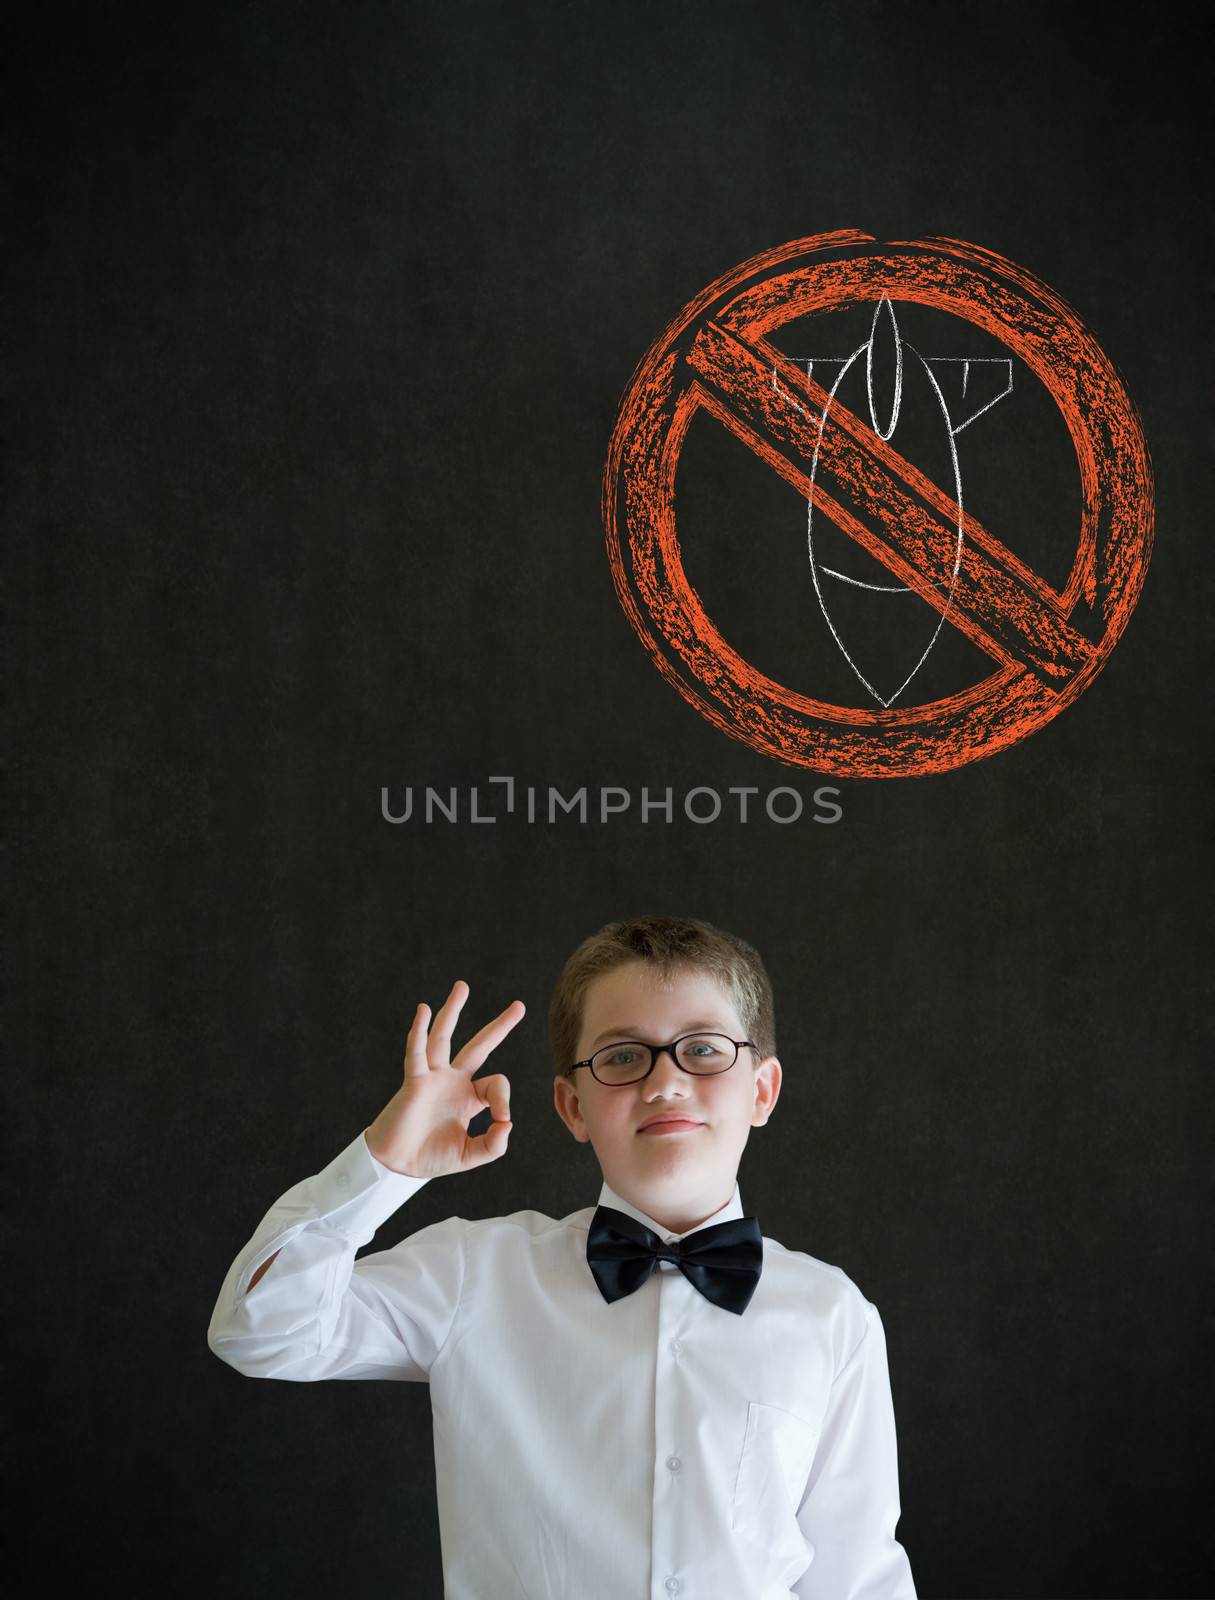 All ok or okay sign boy dressed up as business man with politician no bombs war pacifist sign on blackboard background